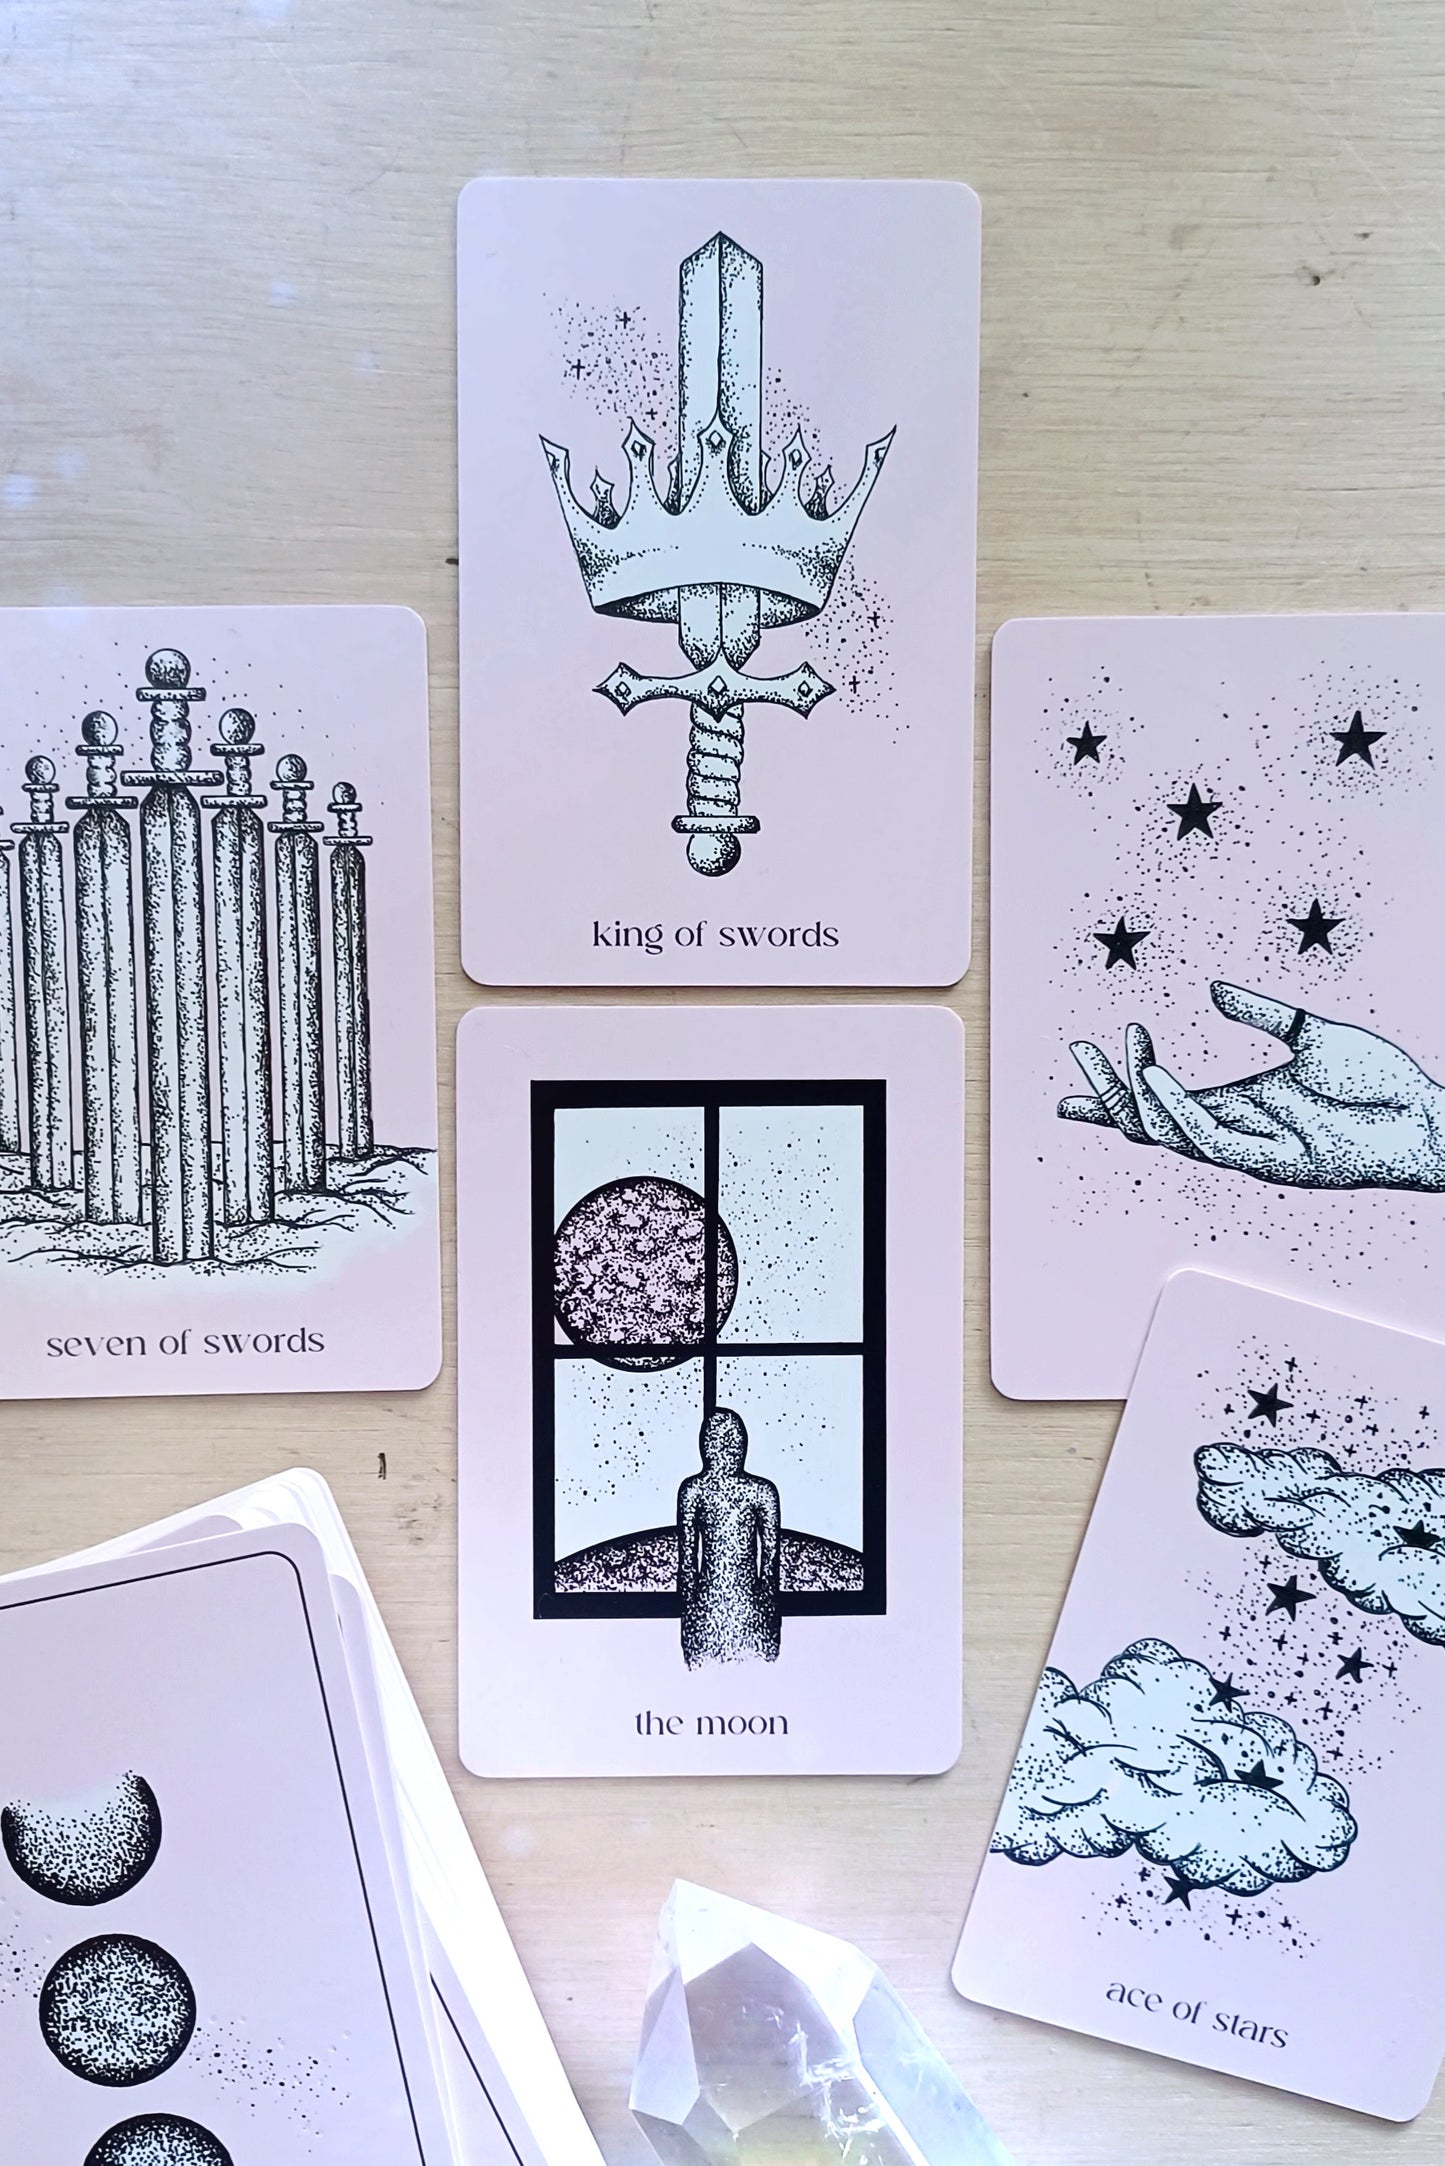 mini tarot cards deck: aesthetic beginner decks for learning tarot reading & spreads | pink tarot with holographic details, pocket size tarot cards with minimalist card art & guidebook